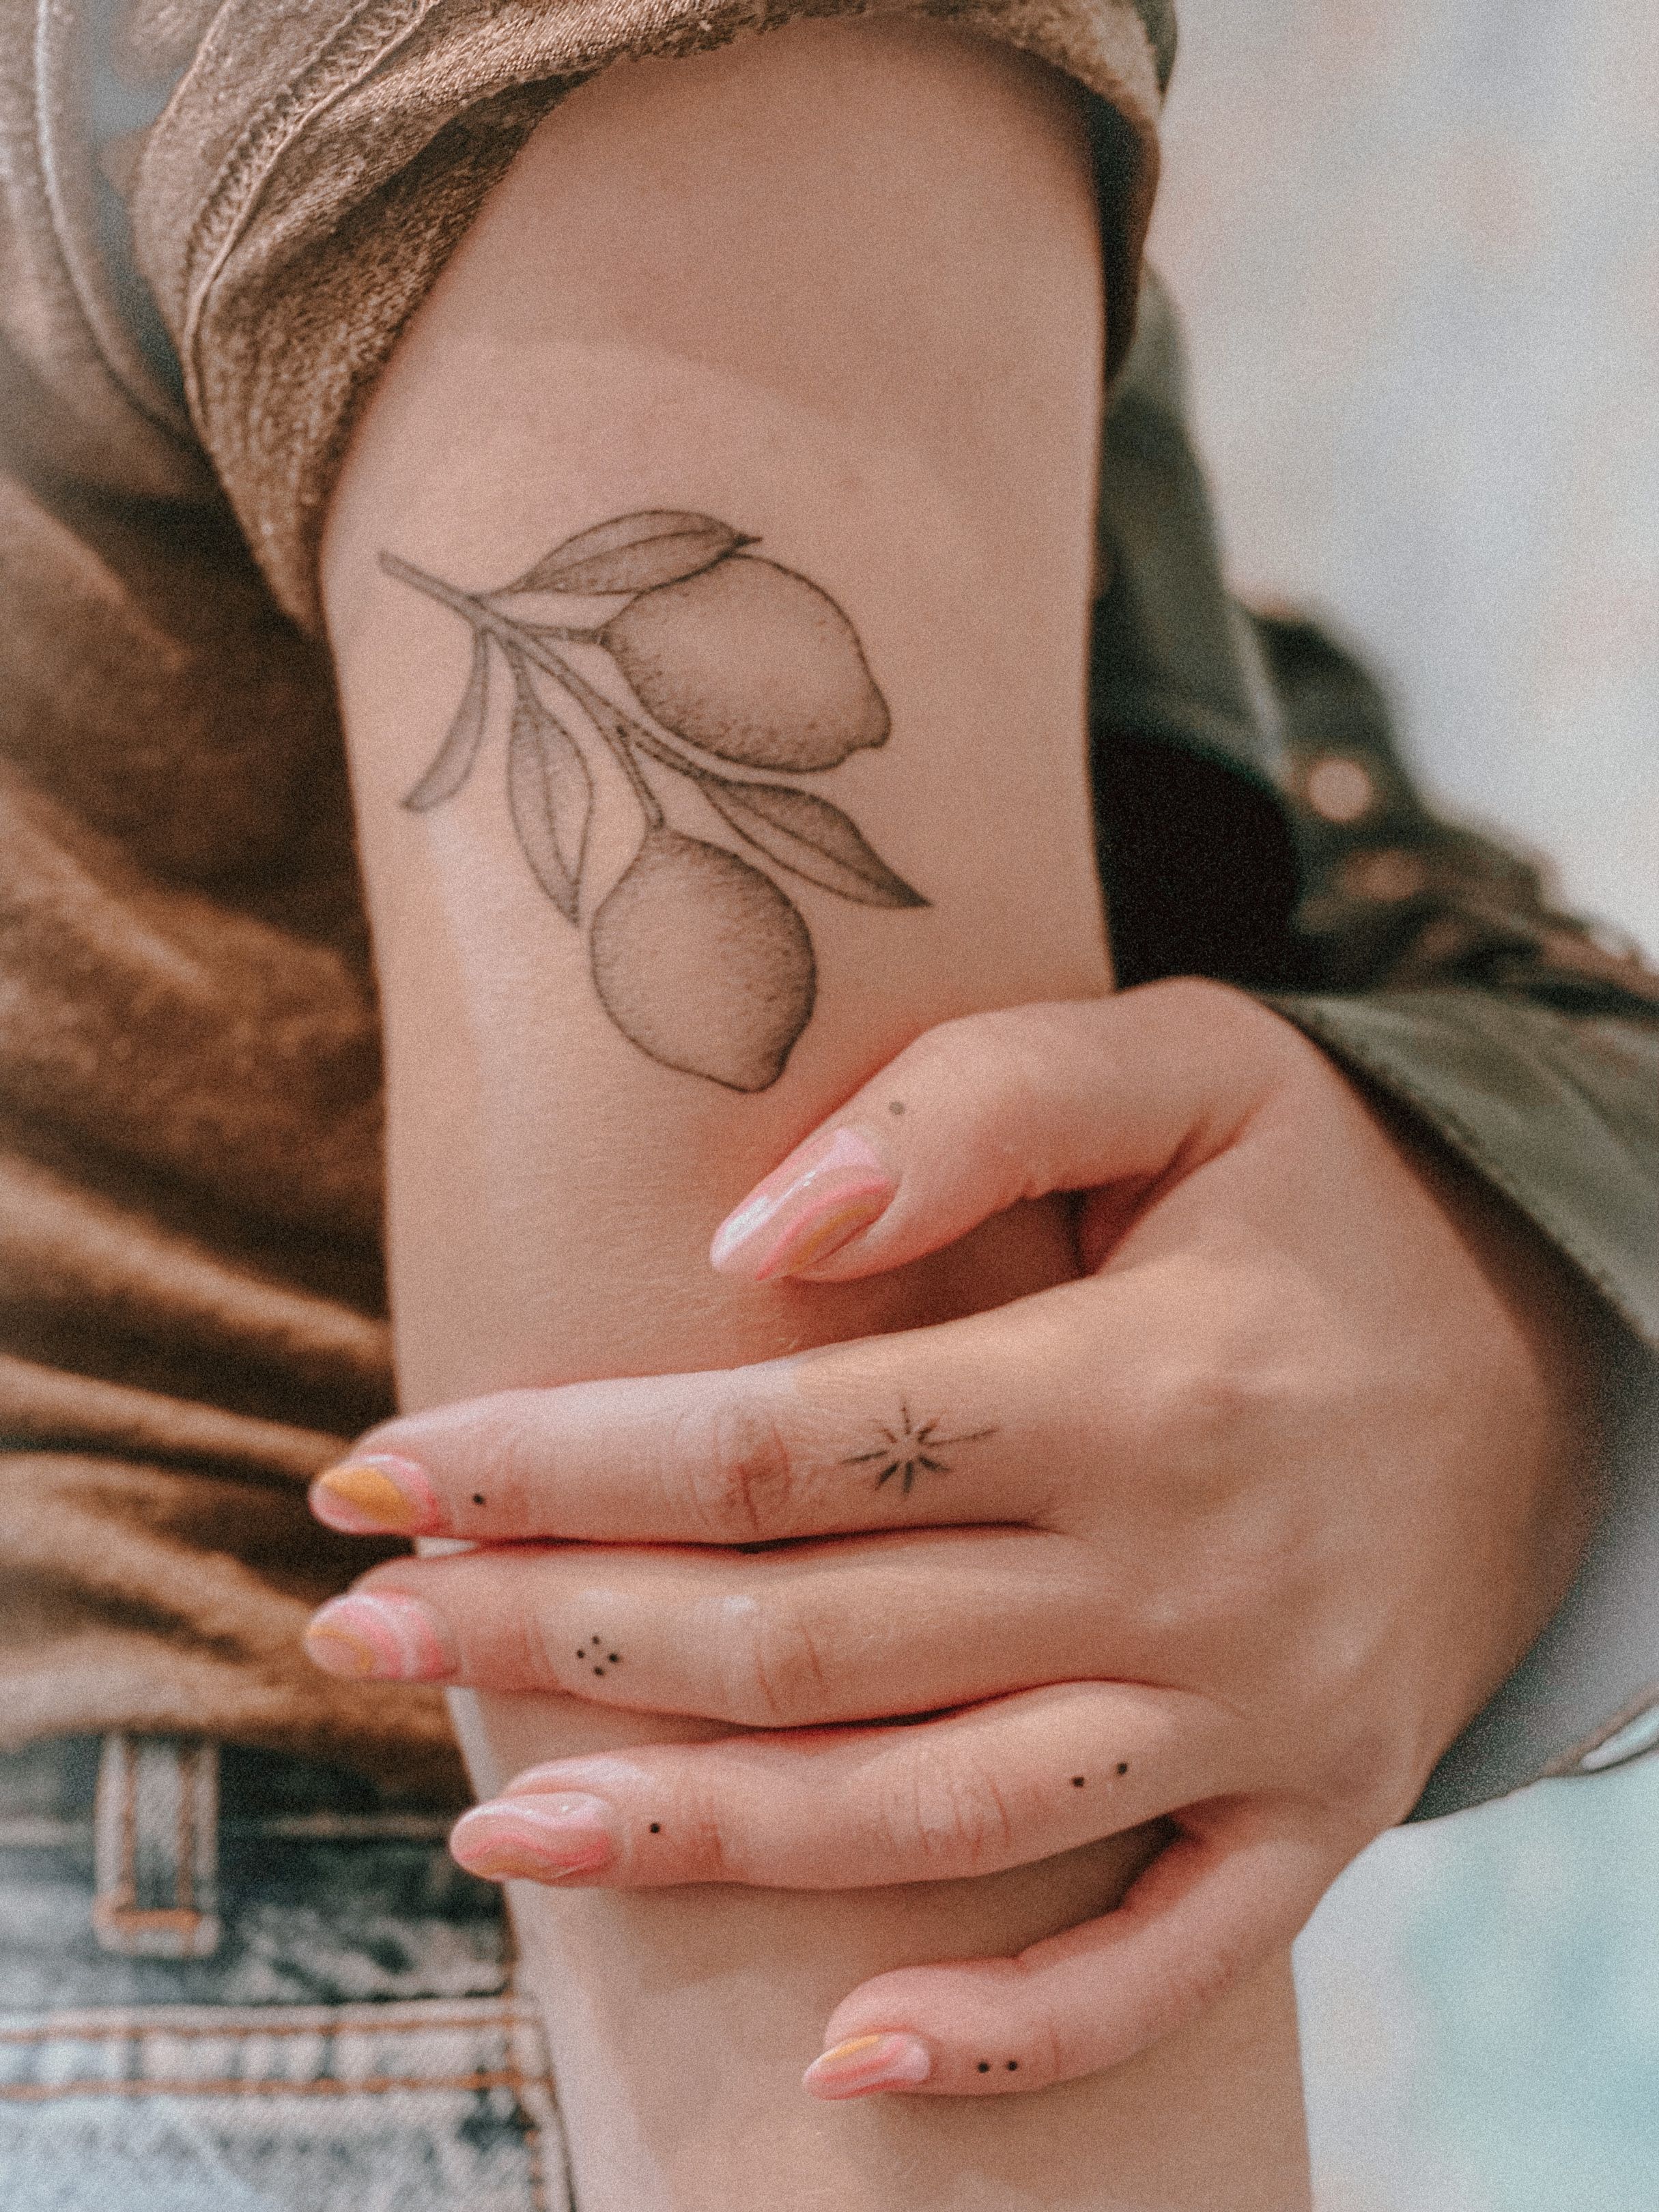 Haven Beauty YYC - Healed ring finger vine tattoo for Jen! We love this one  so much, it's so feminine and different! What tiny tattoo are you  interested in? Artist - Brittany